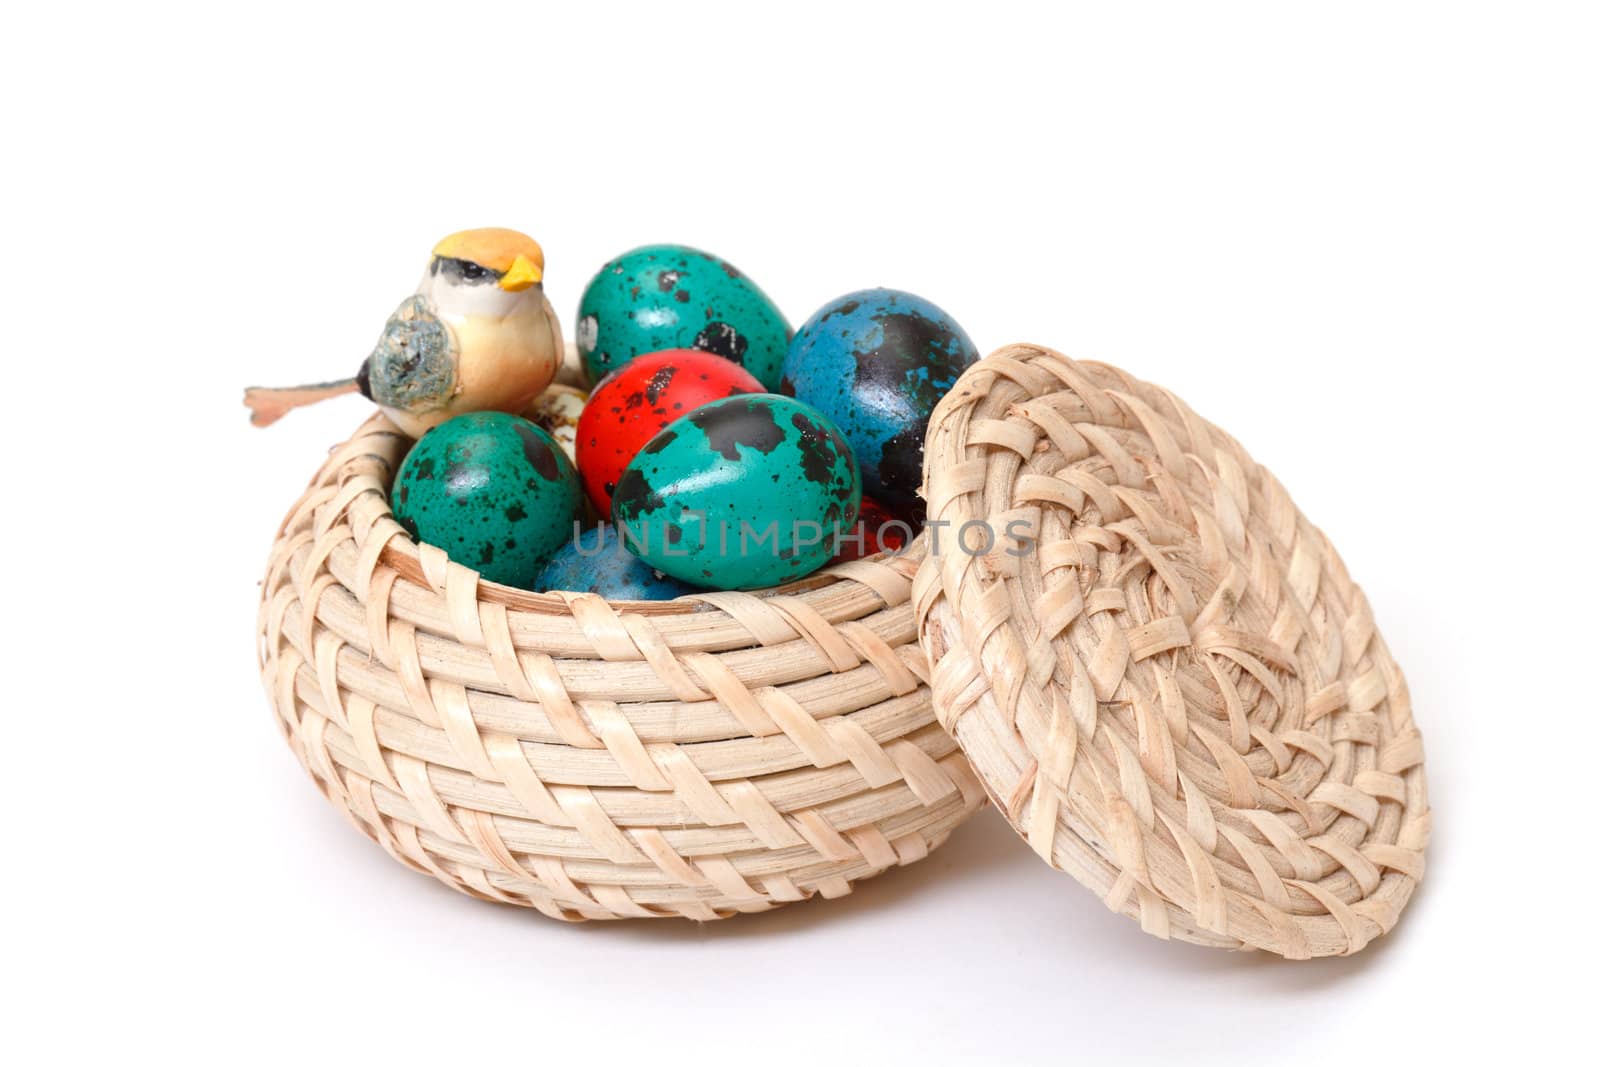 quail easter eggs in basket by Discovod